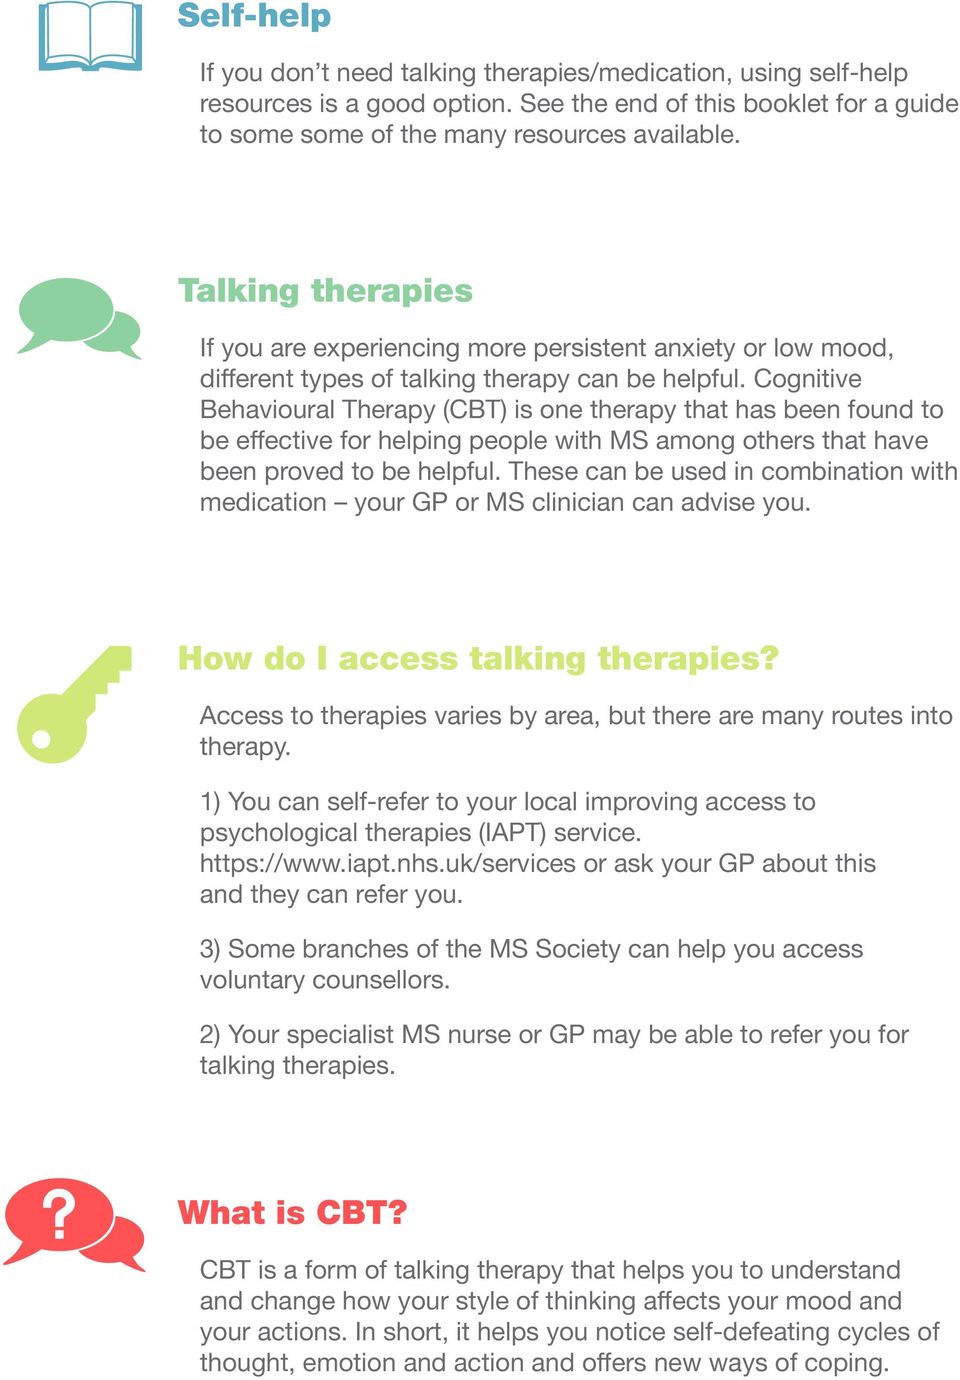 Cognitive Behavioural Therapy (CBT) is one therapy that has been found to be effective for helping people with MS among others that have been proved to be helpful.